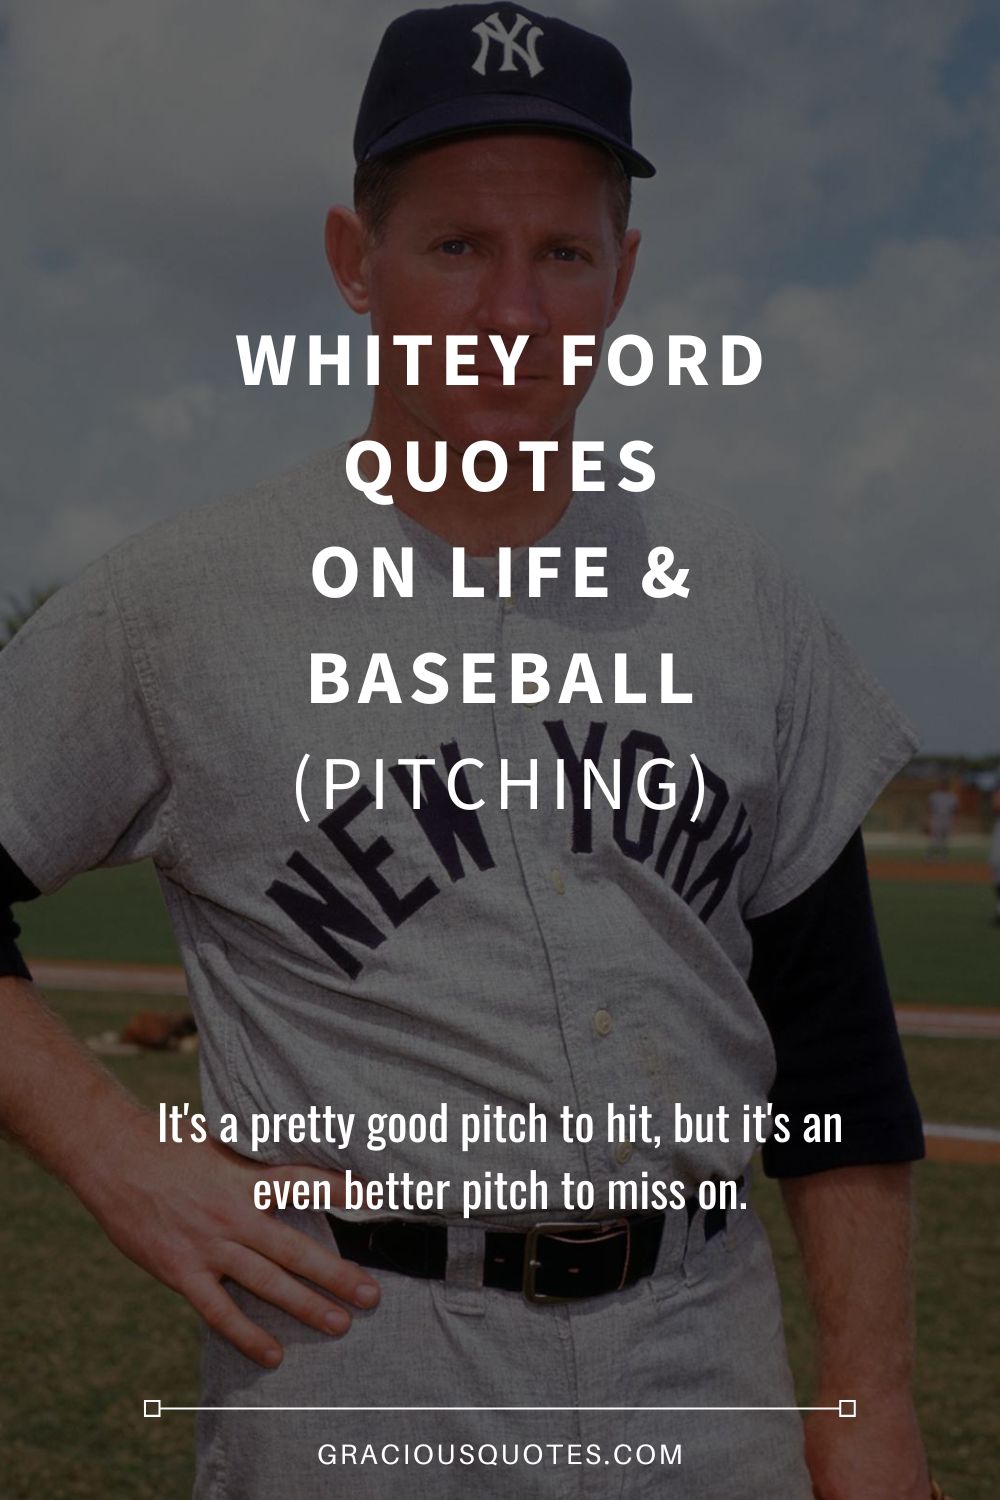 Whitey Ford Quotes on Life & Baseball (PITCHING) - Gracious Quotes